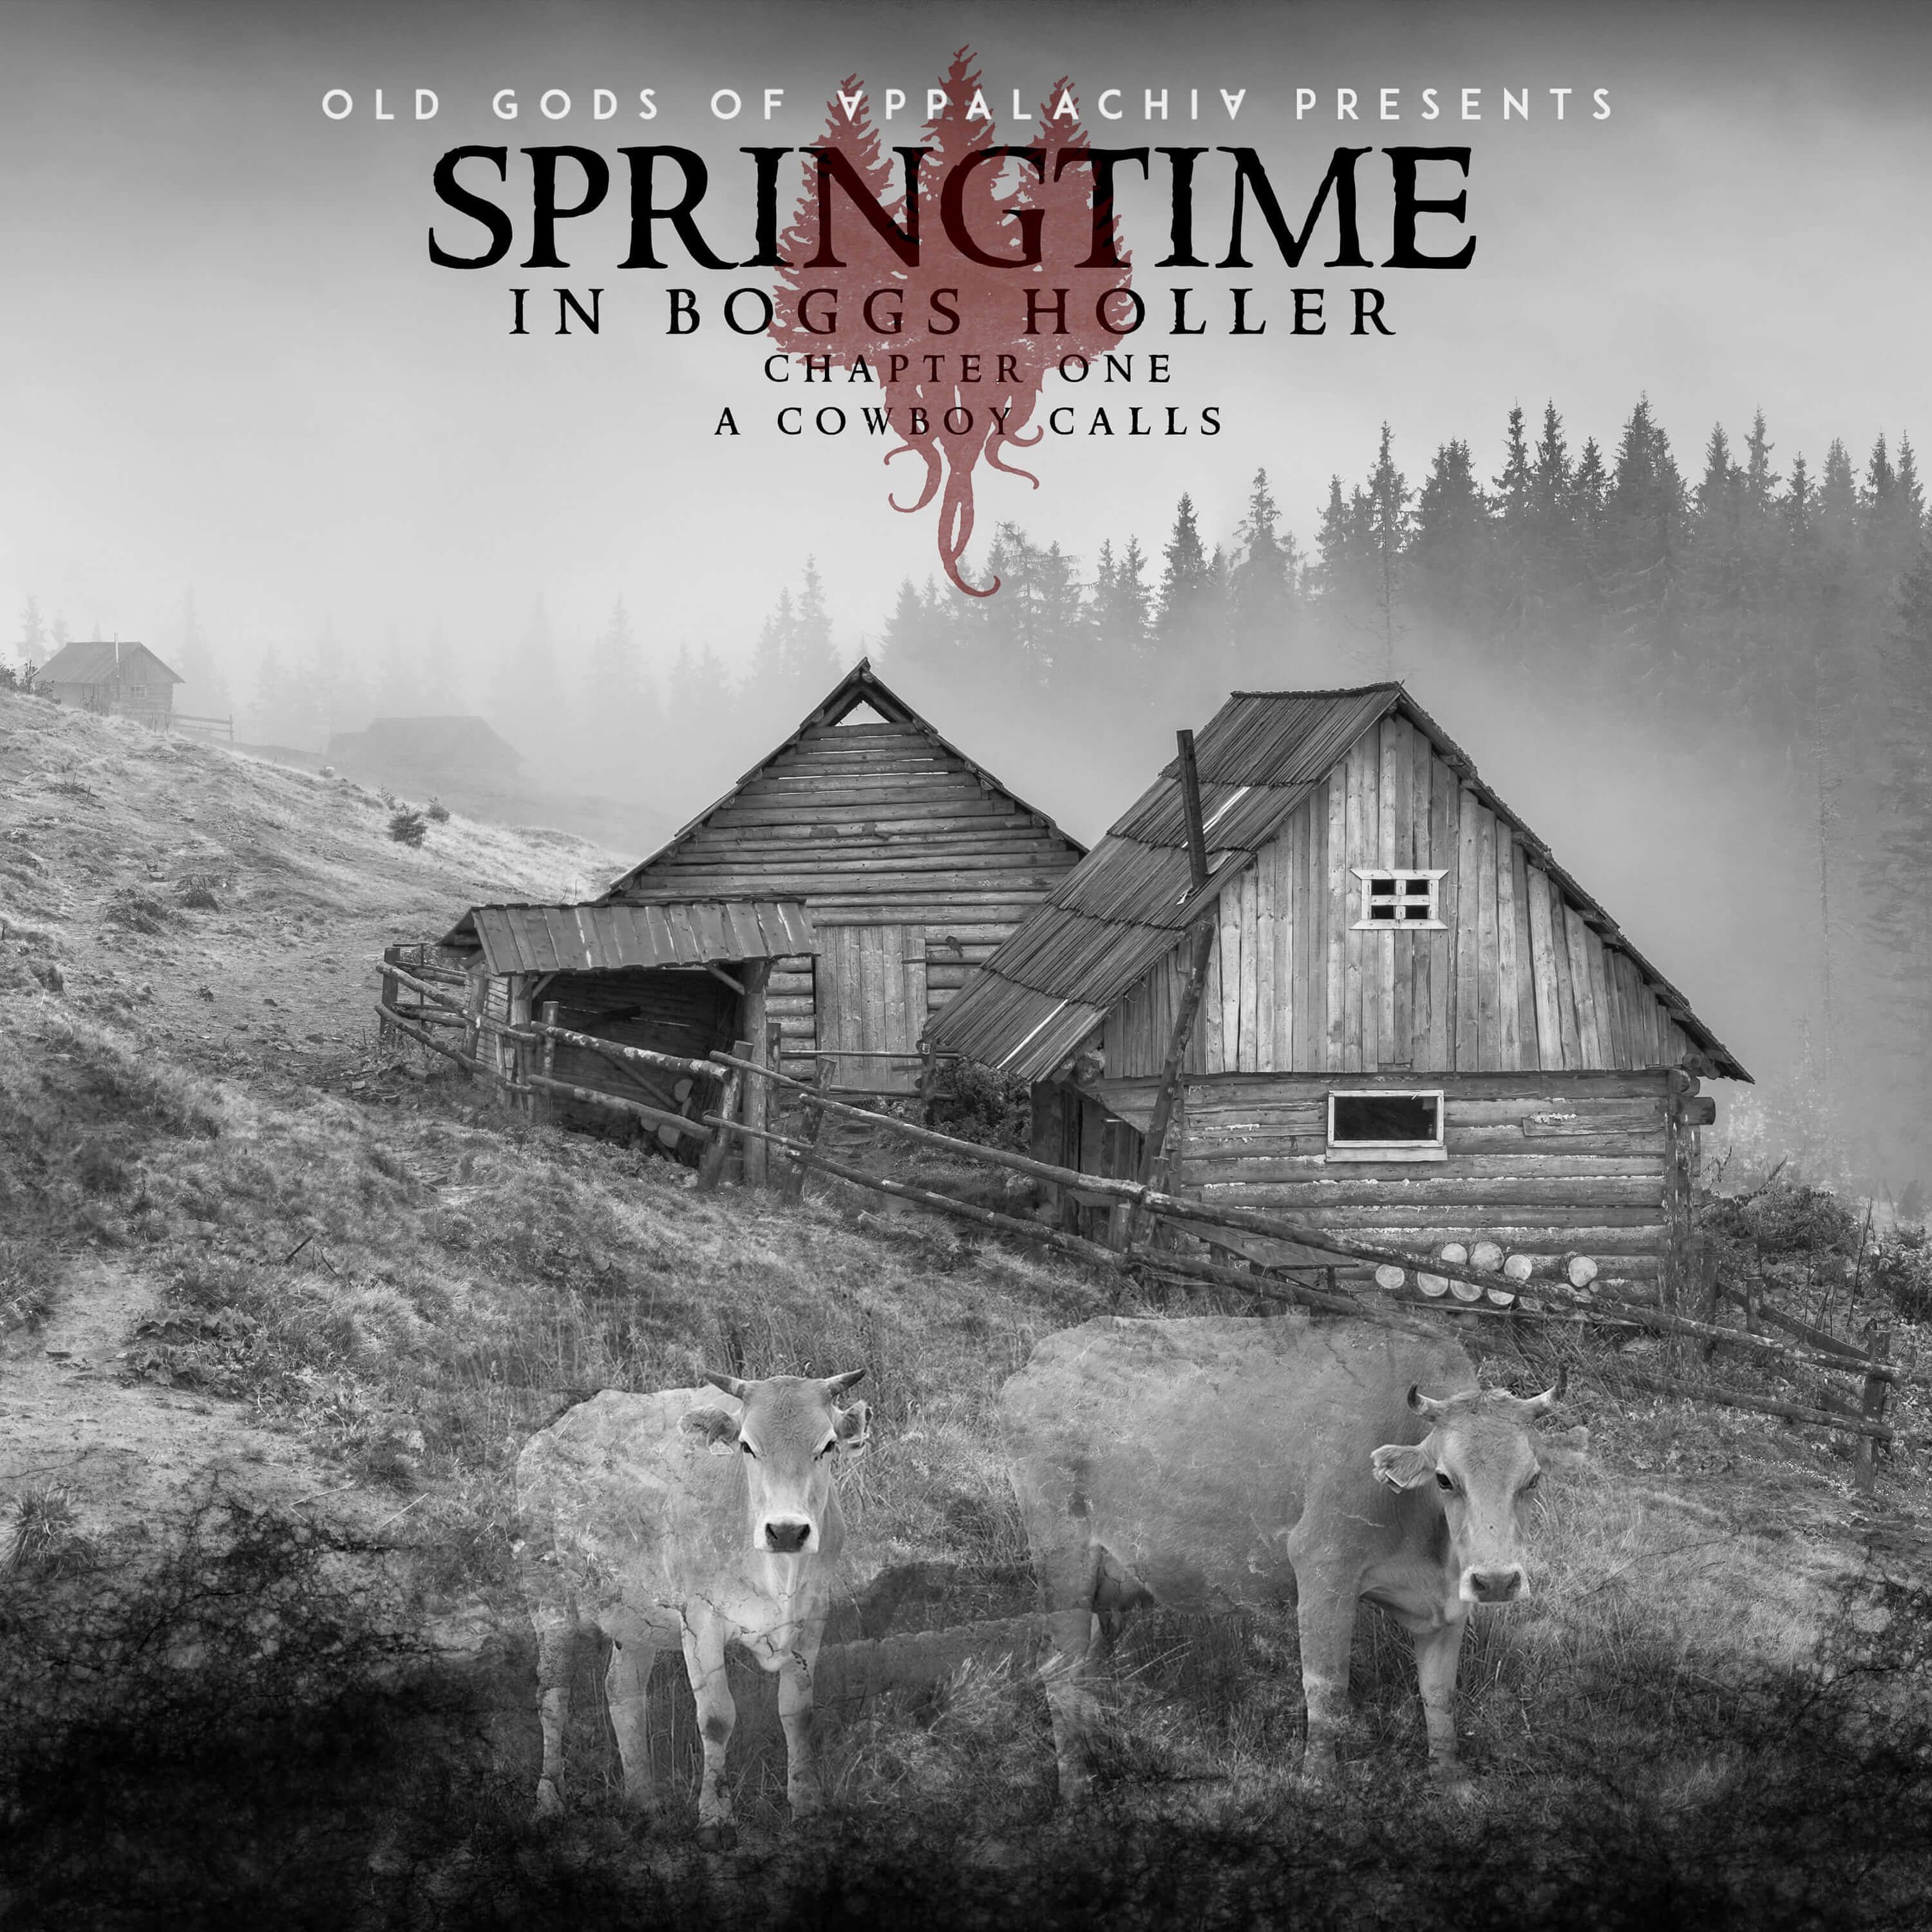 Springtime in Boggs Holler – Chapter One: A Cowboy Calls